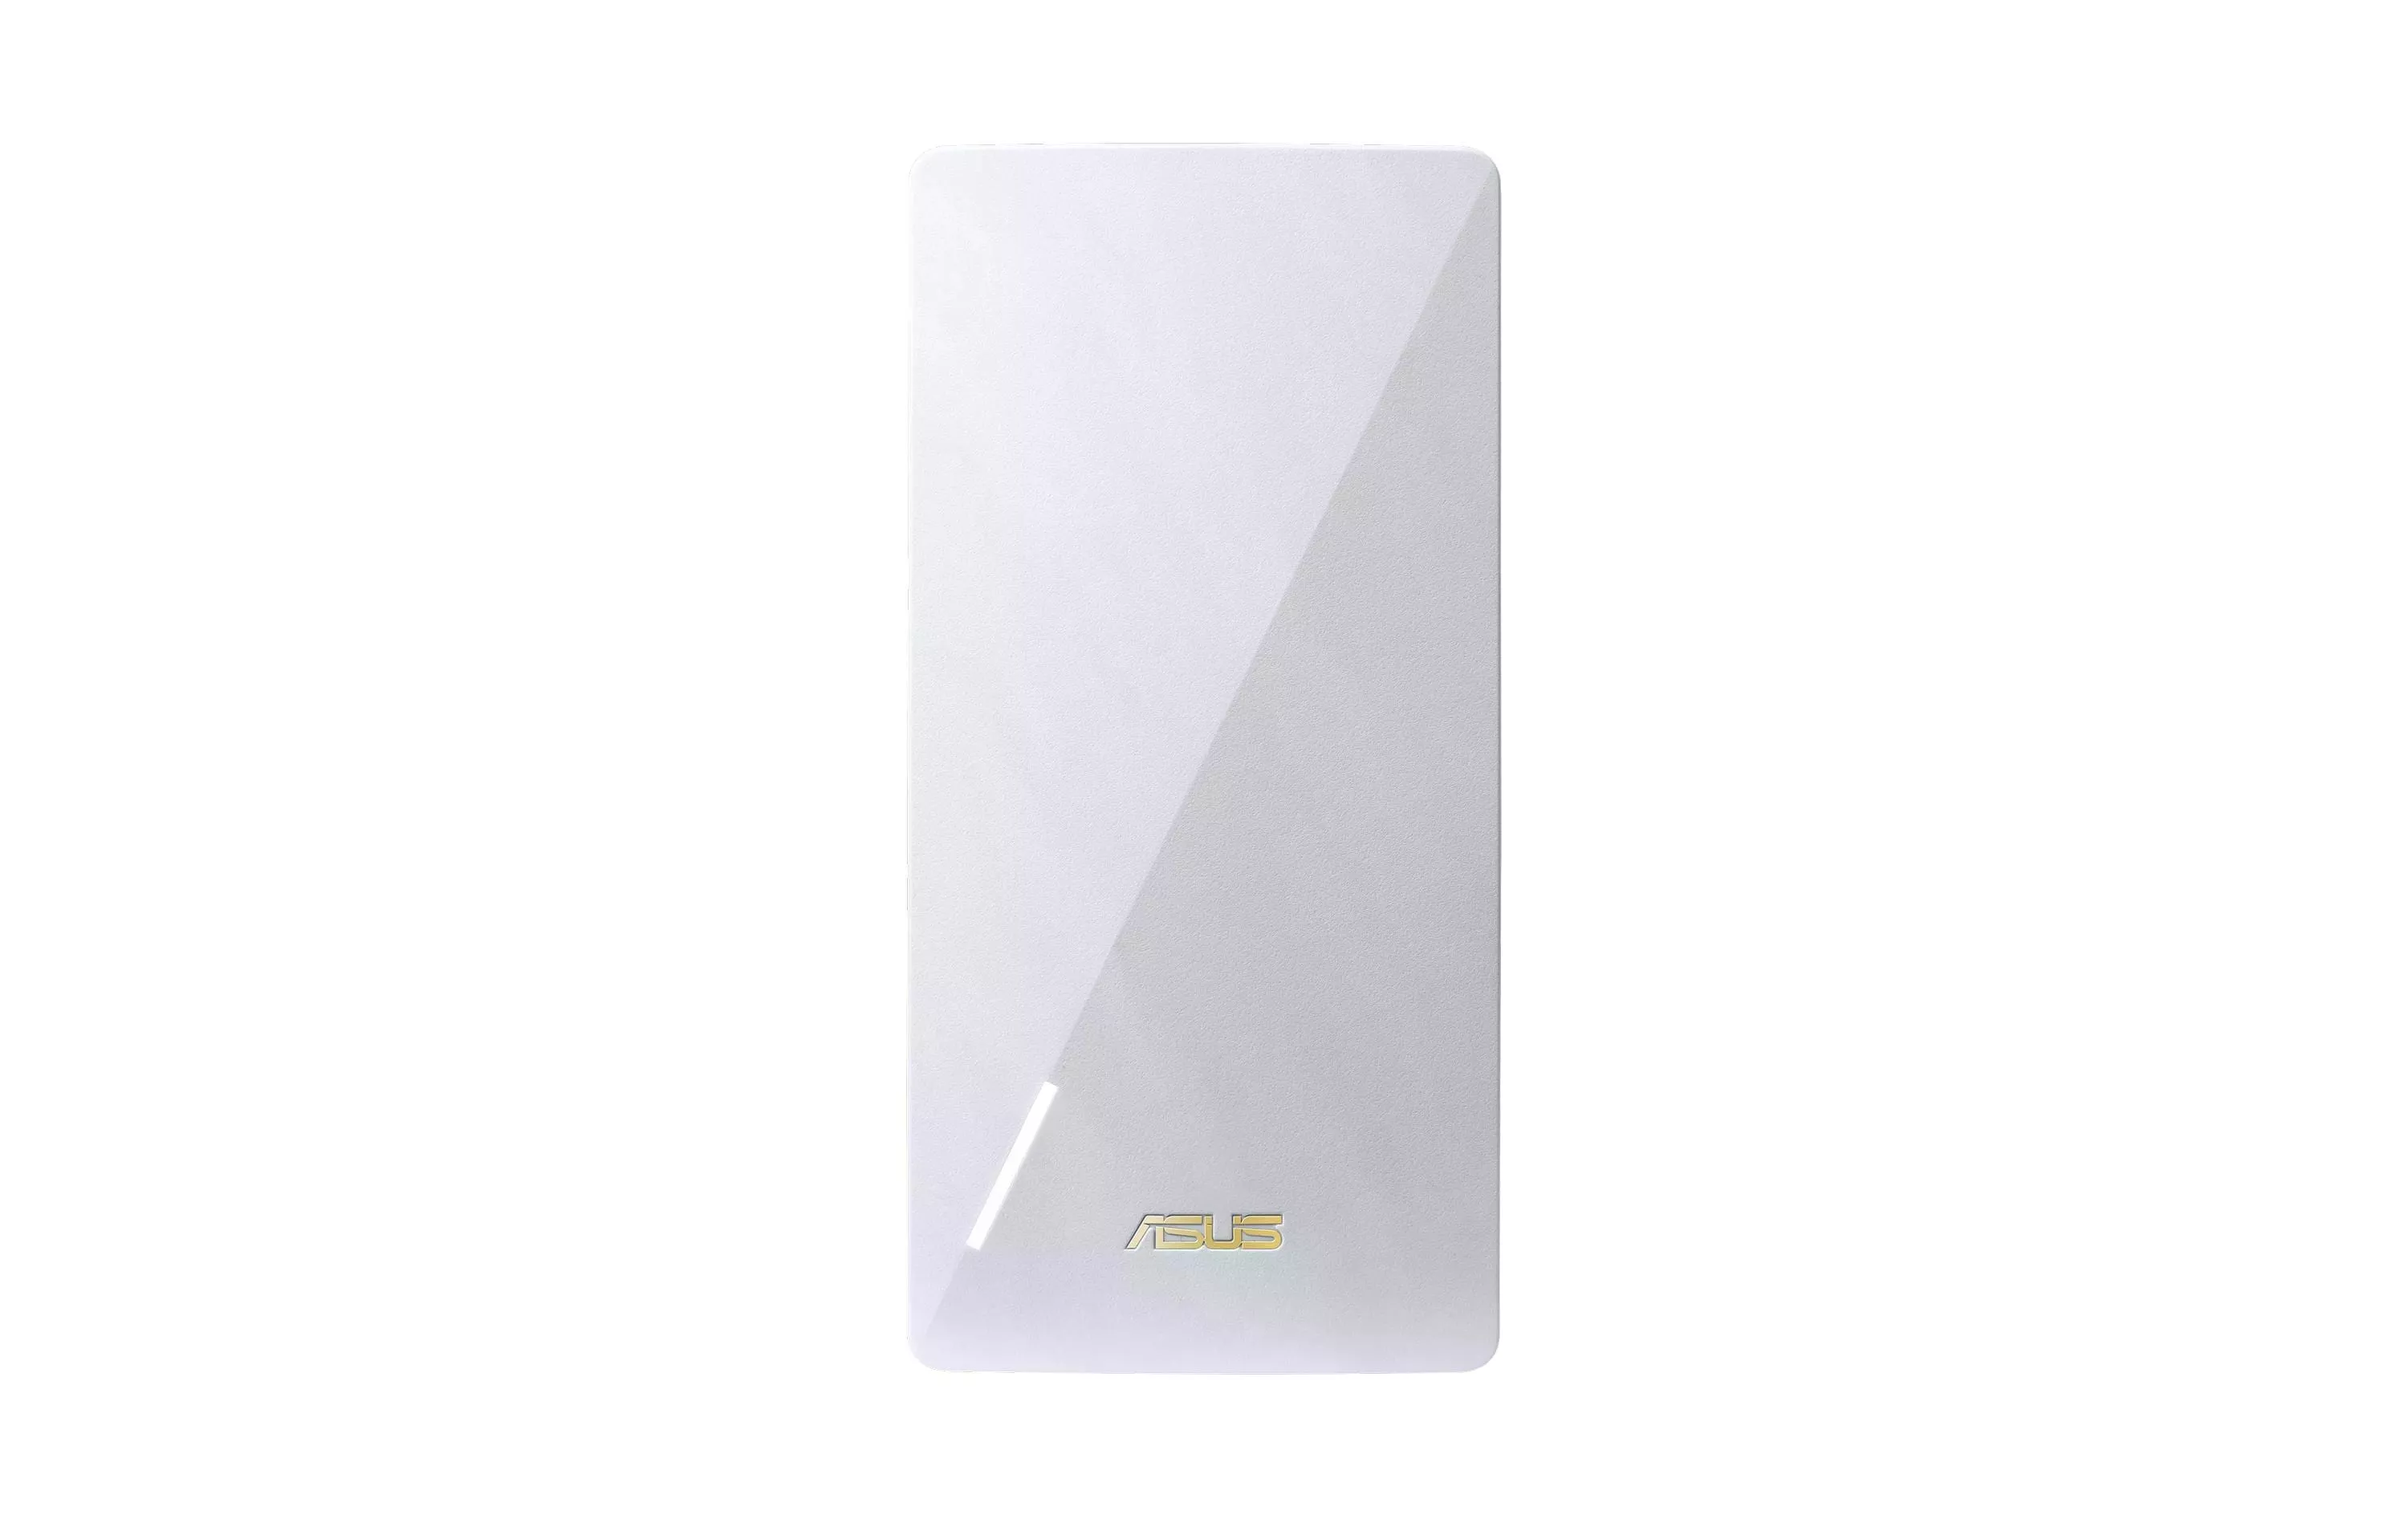 Ripetitore WLAN ASUS RP-AX58